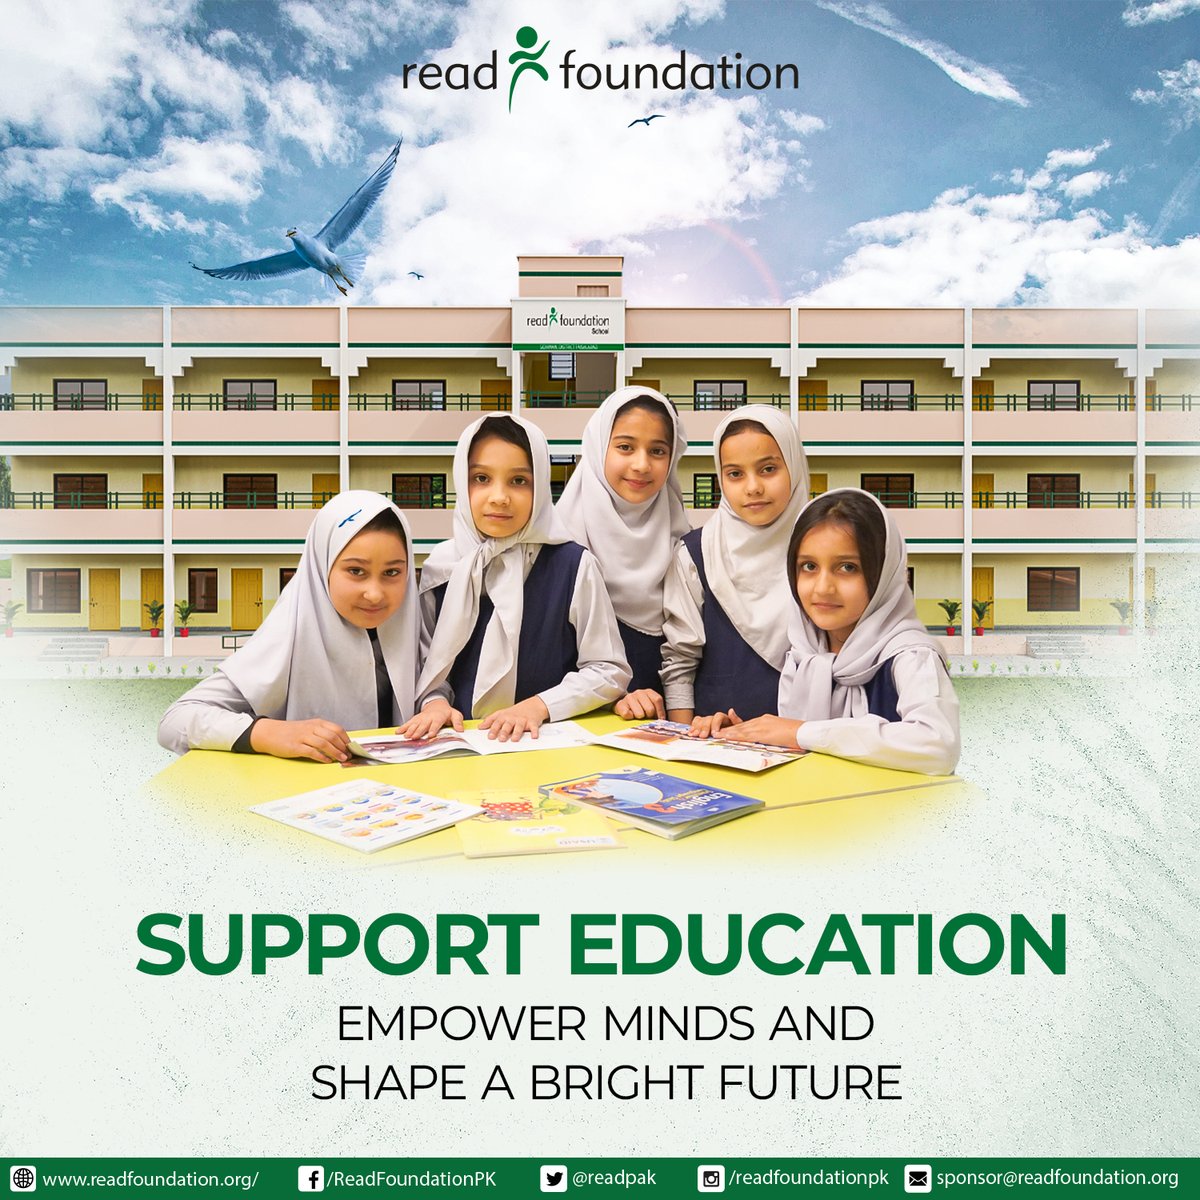 Supporting education opens doors to opportunity and empowers students to thrive. Let's work together to ensure everyone has access to quality education. #READFoundation #Education #empowerment #school #society #Future